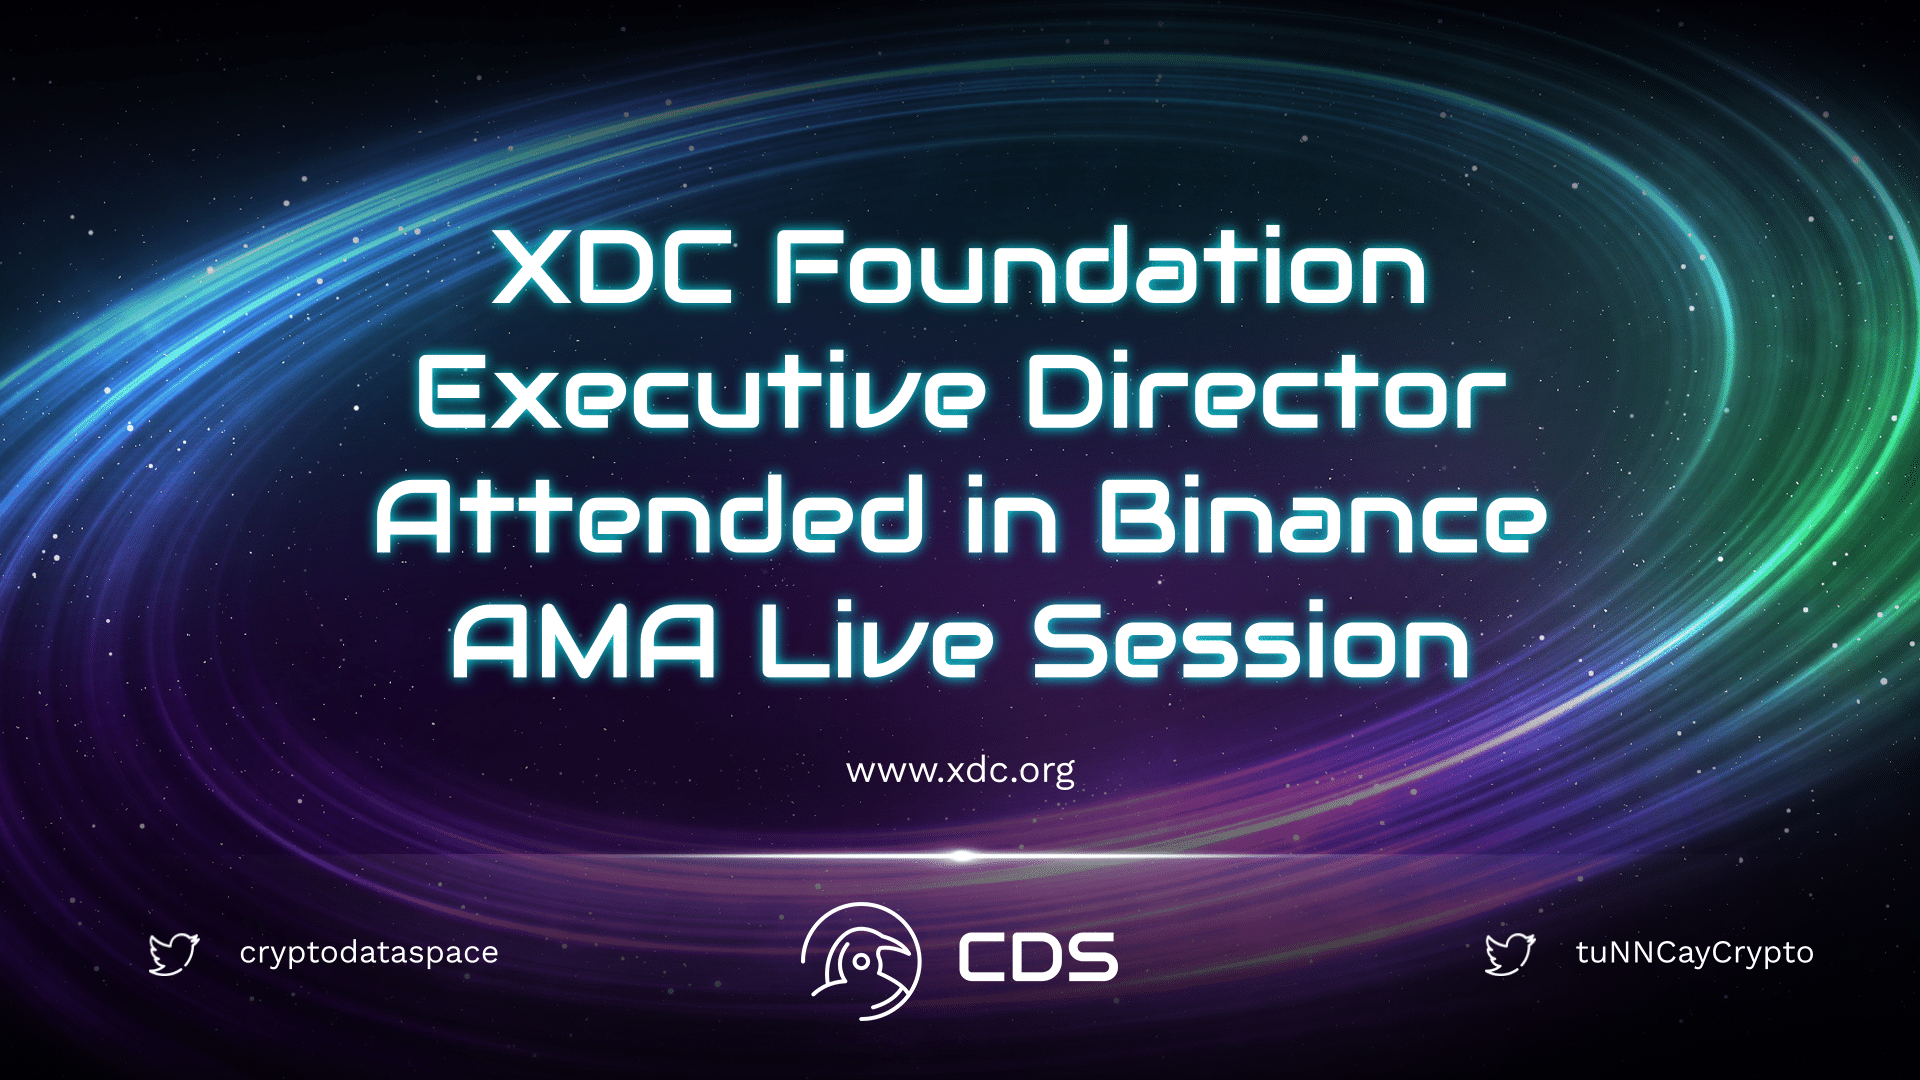 XDC Foundation Executive Director Attended in Binance AMA Live Session